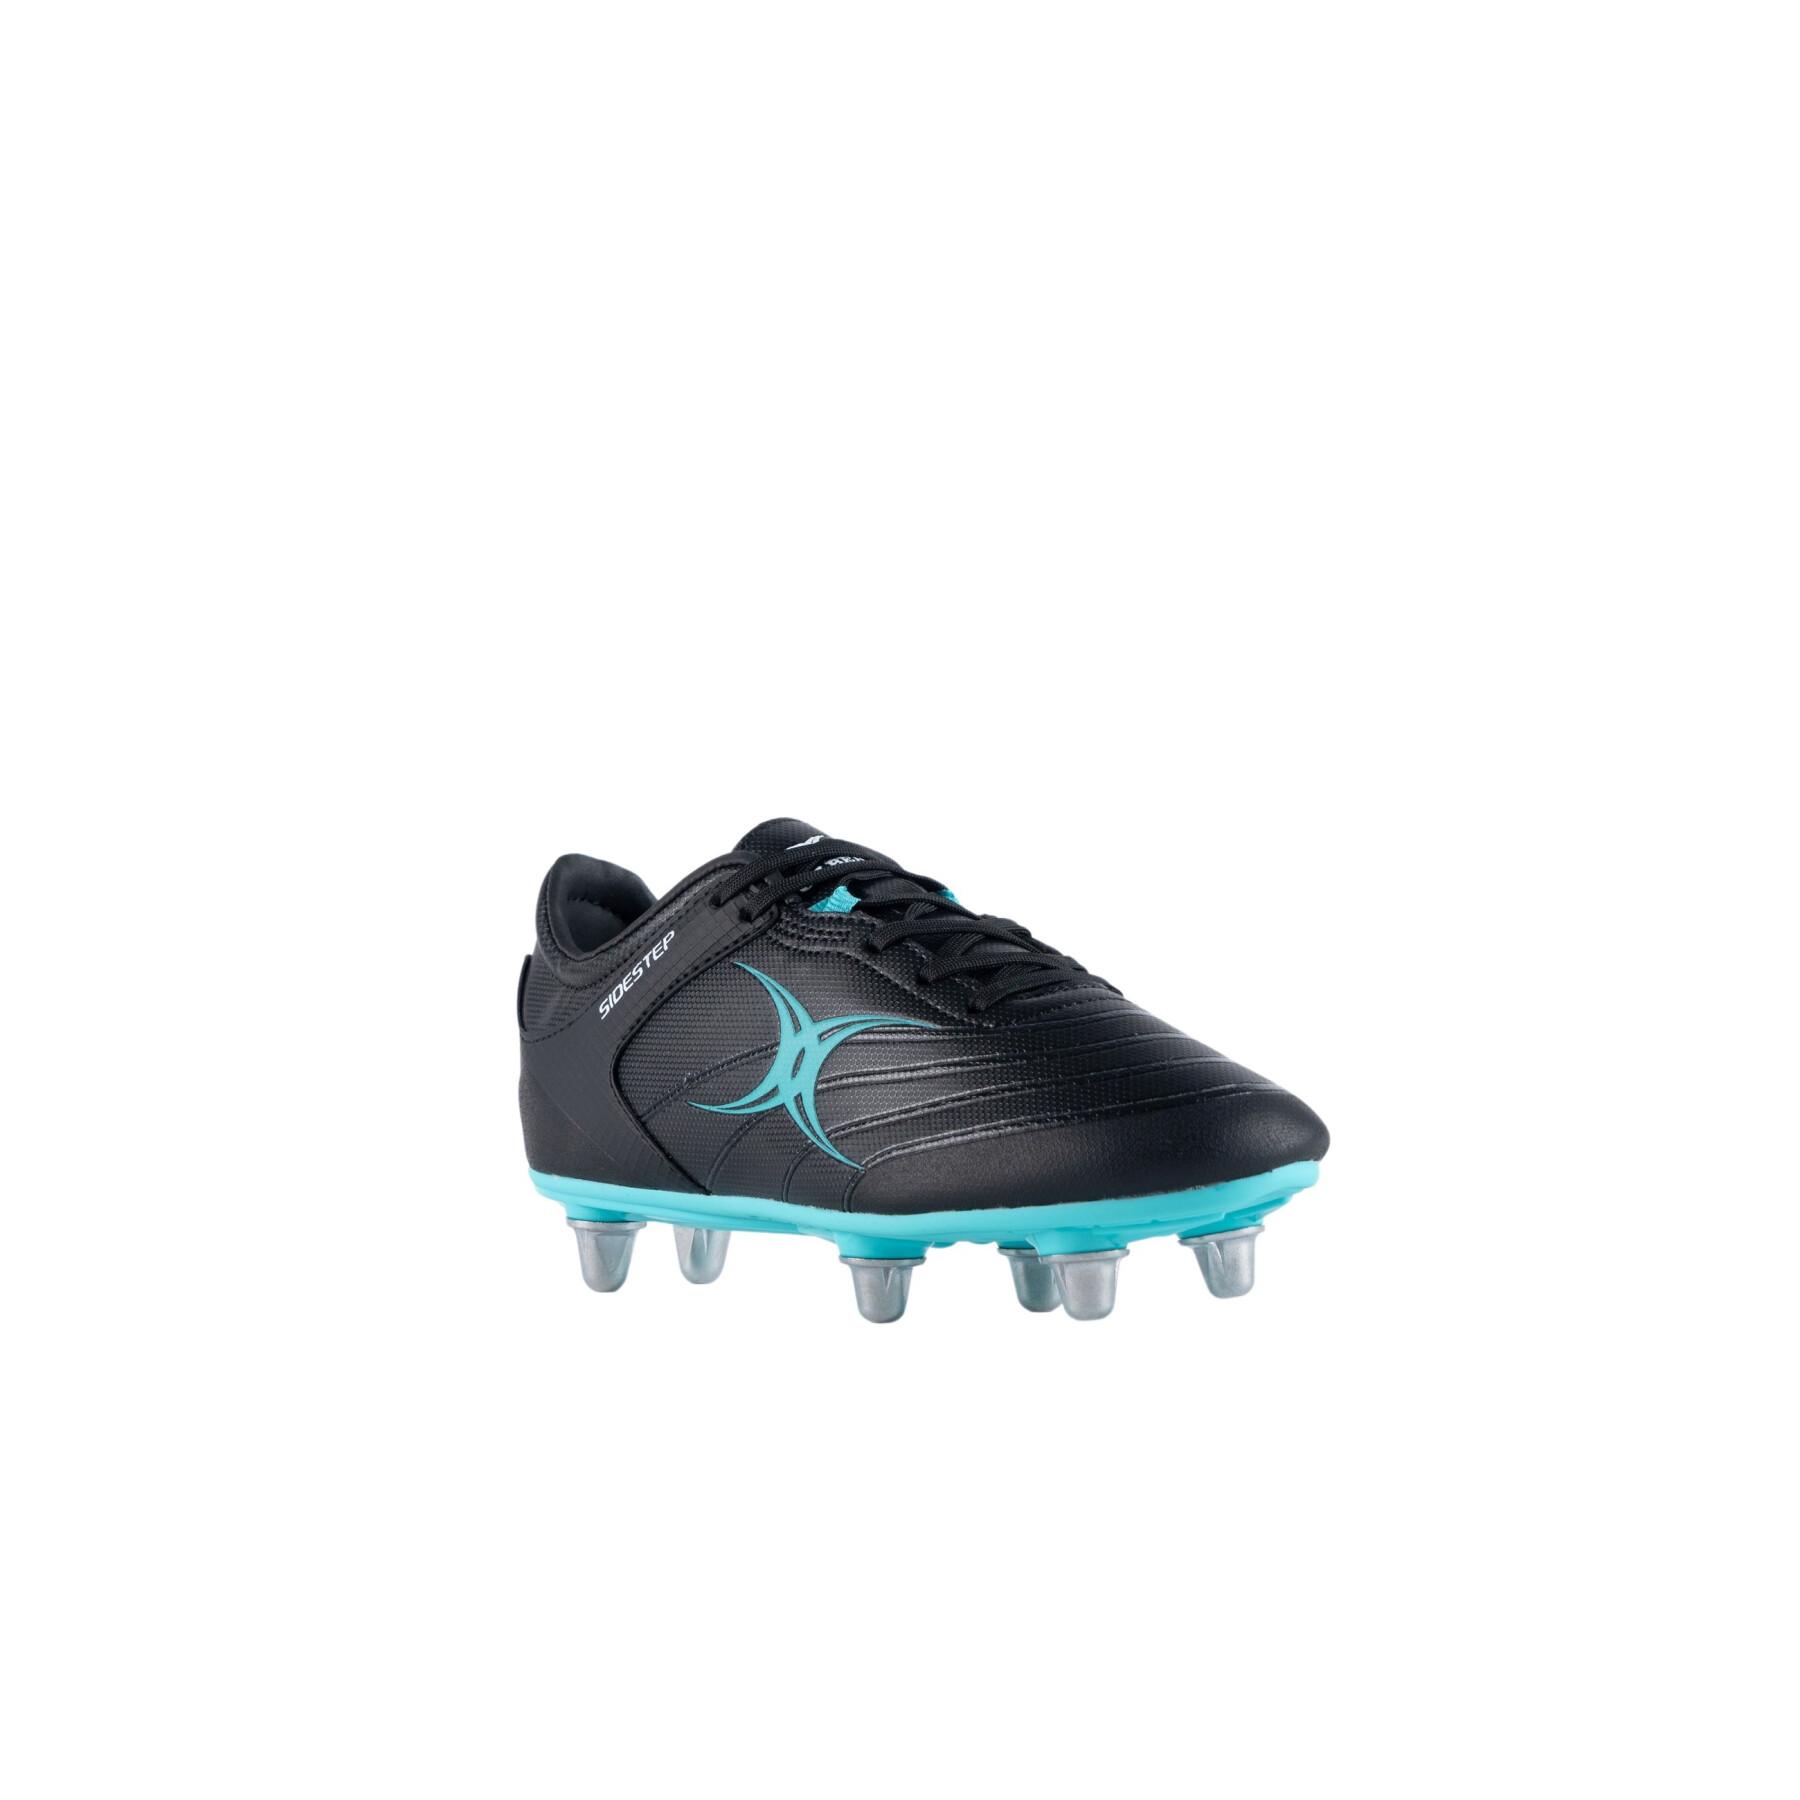 Chaussures de rugby Gilbert Sidestep X15 LO 6S